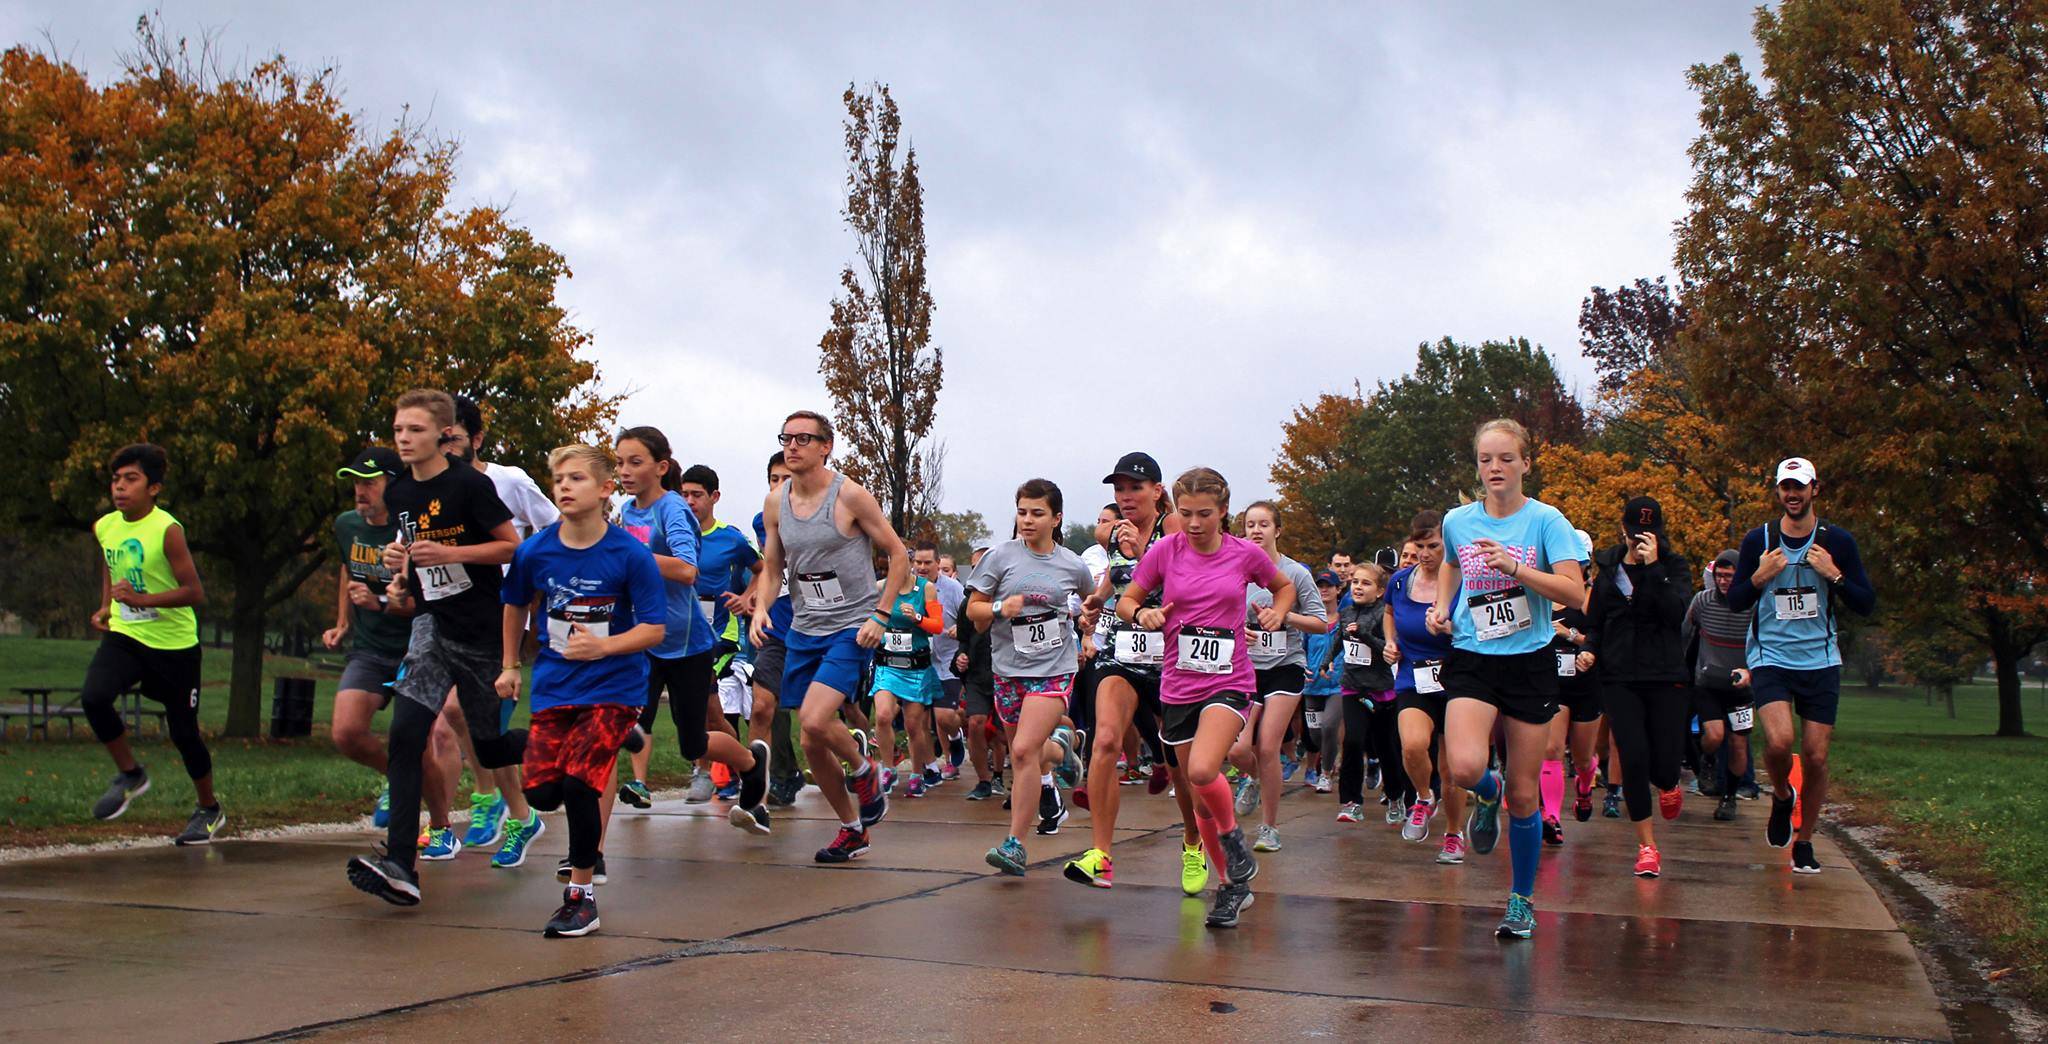 Run and eat a cupcake to benefit Champaign-Urbana Special Recreation